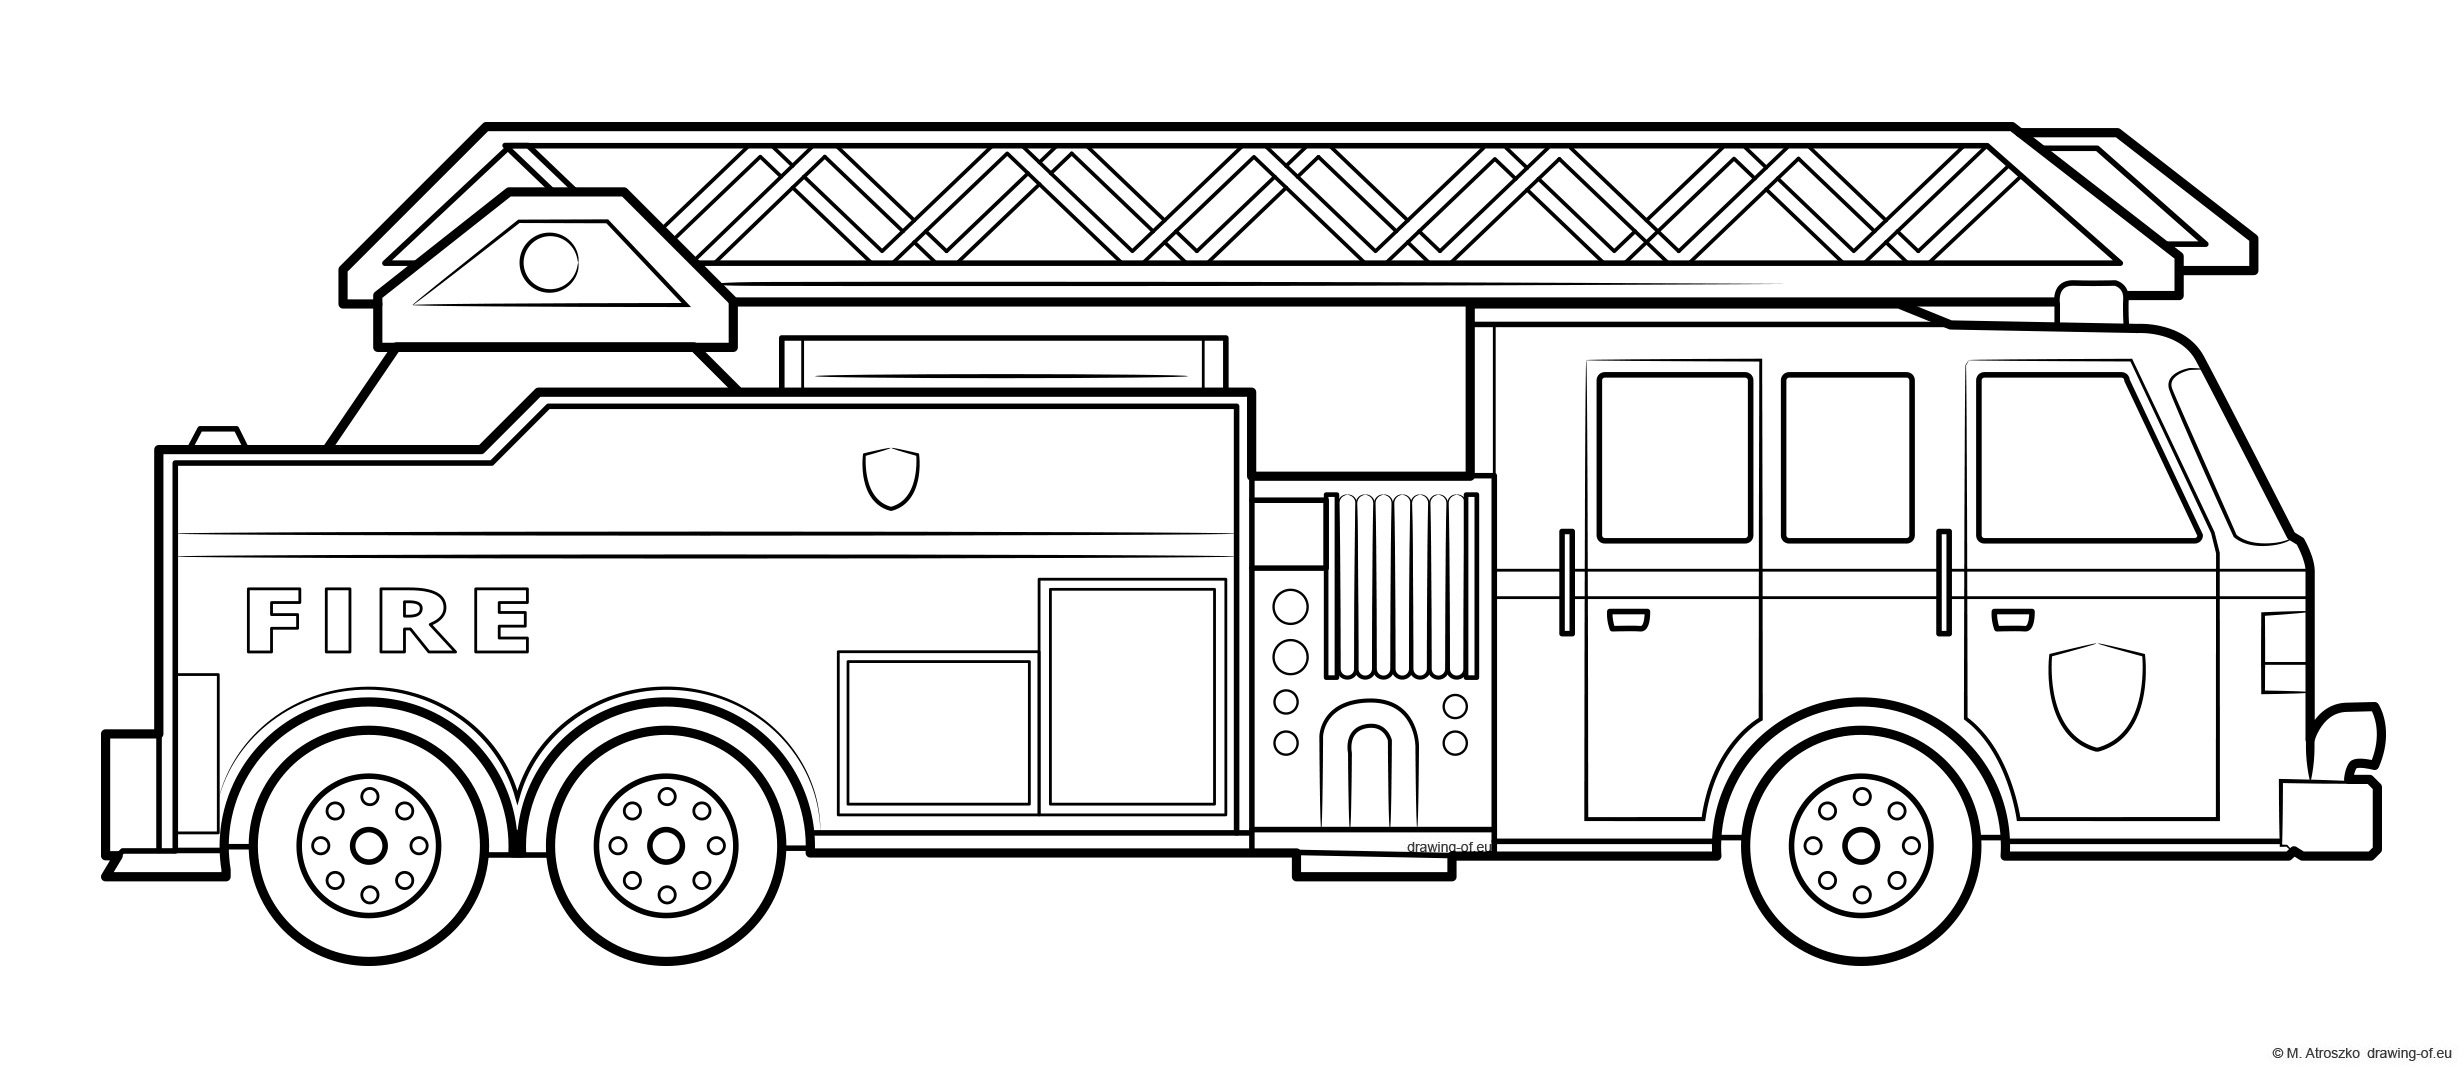 American fire truck coloring page - draw